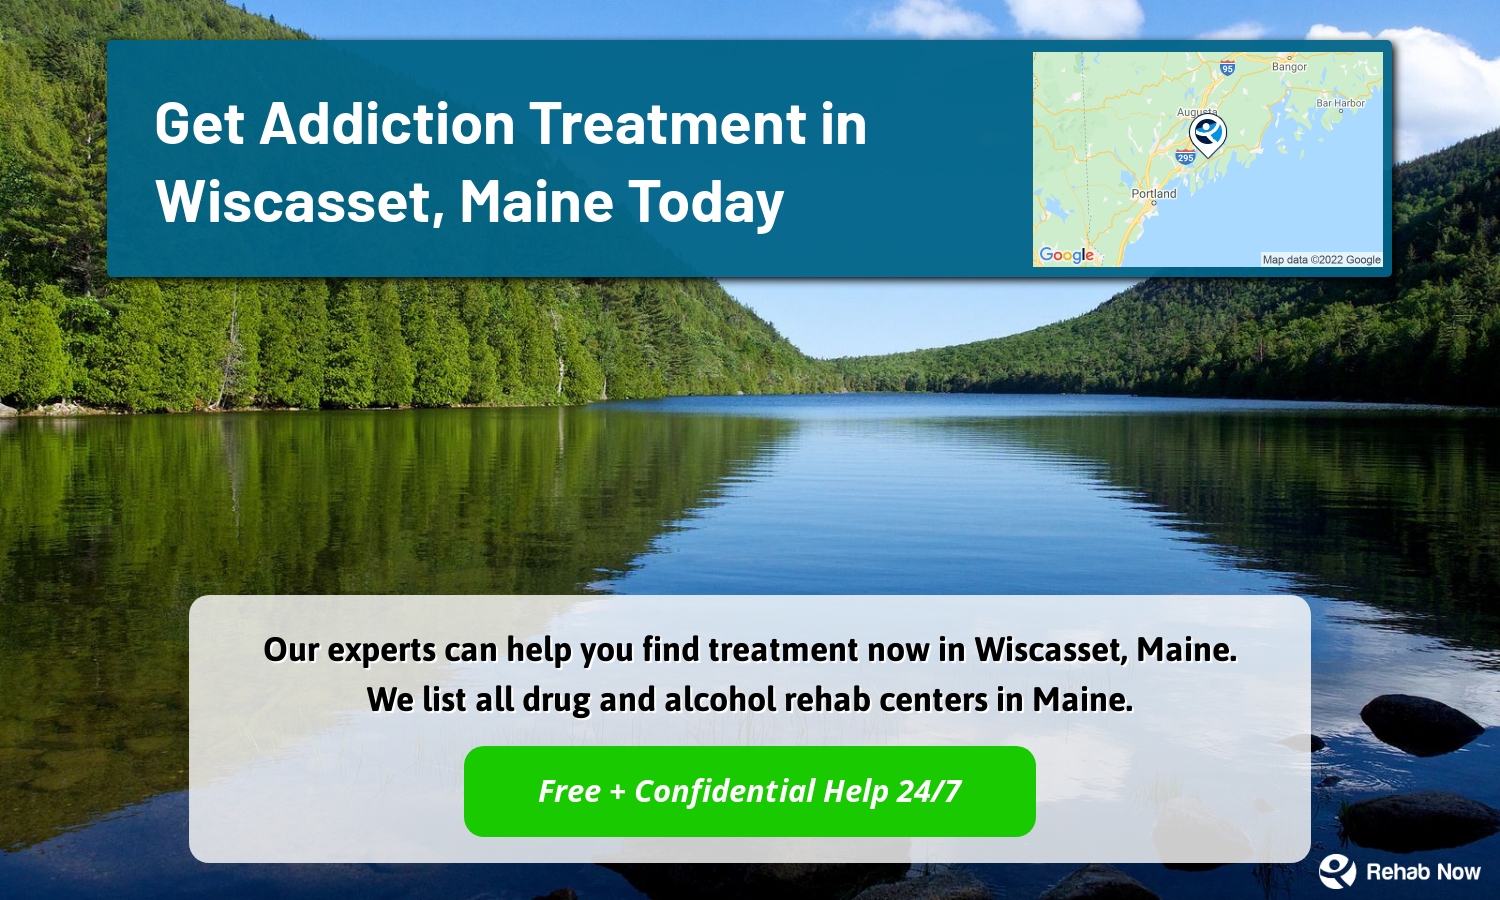 Our experts can help you find treatment now in Wiscasset, Maine. We list all drug and alcohol rehab centers in Maine.